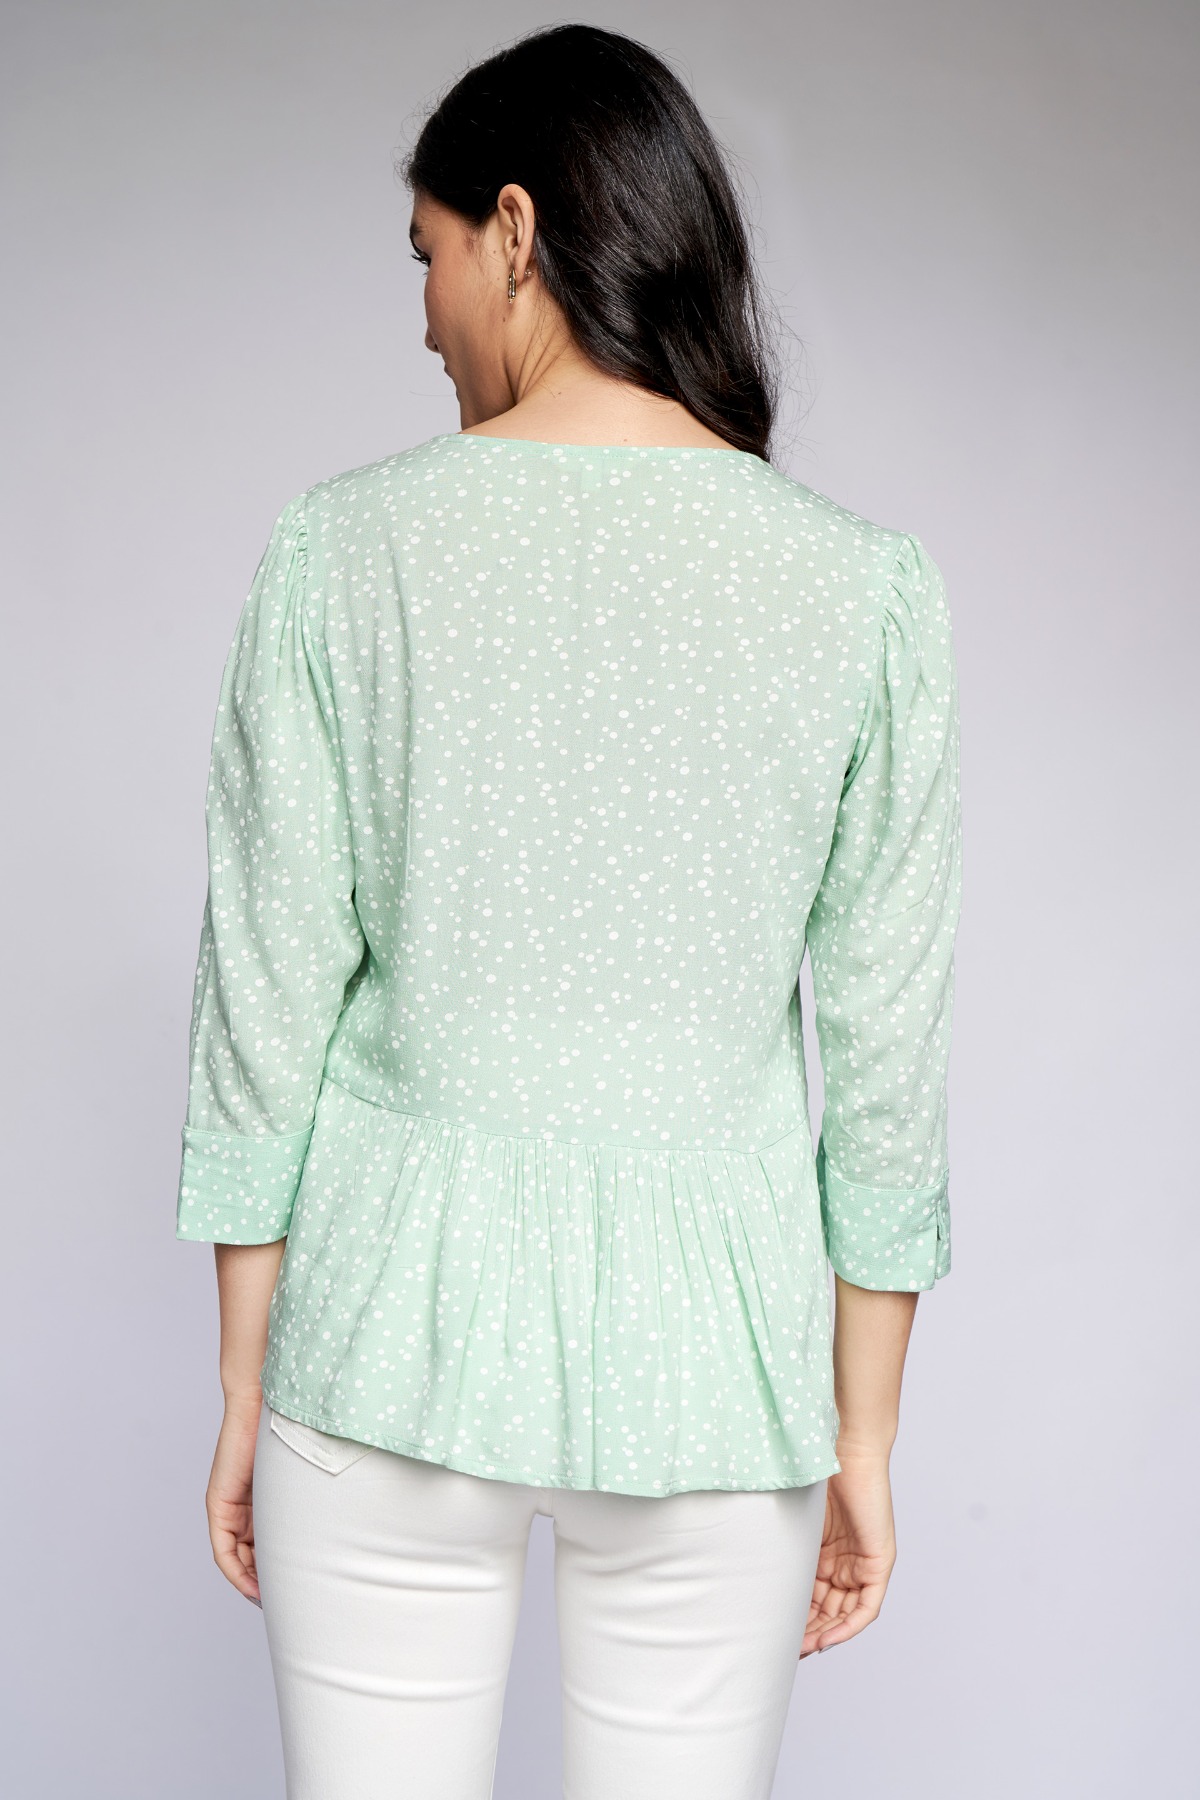 4 - Sage Green Fit  and Flare Top, image 4